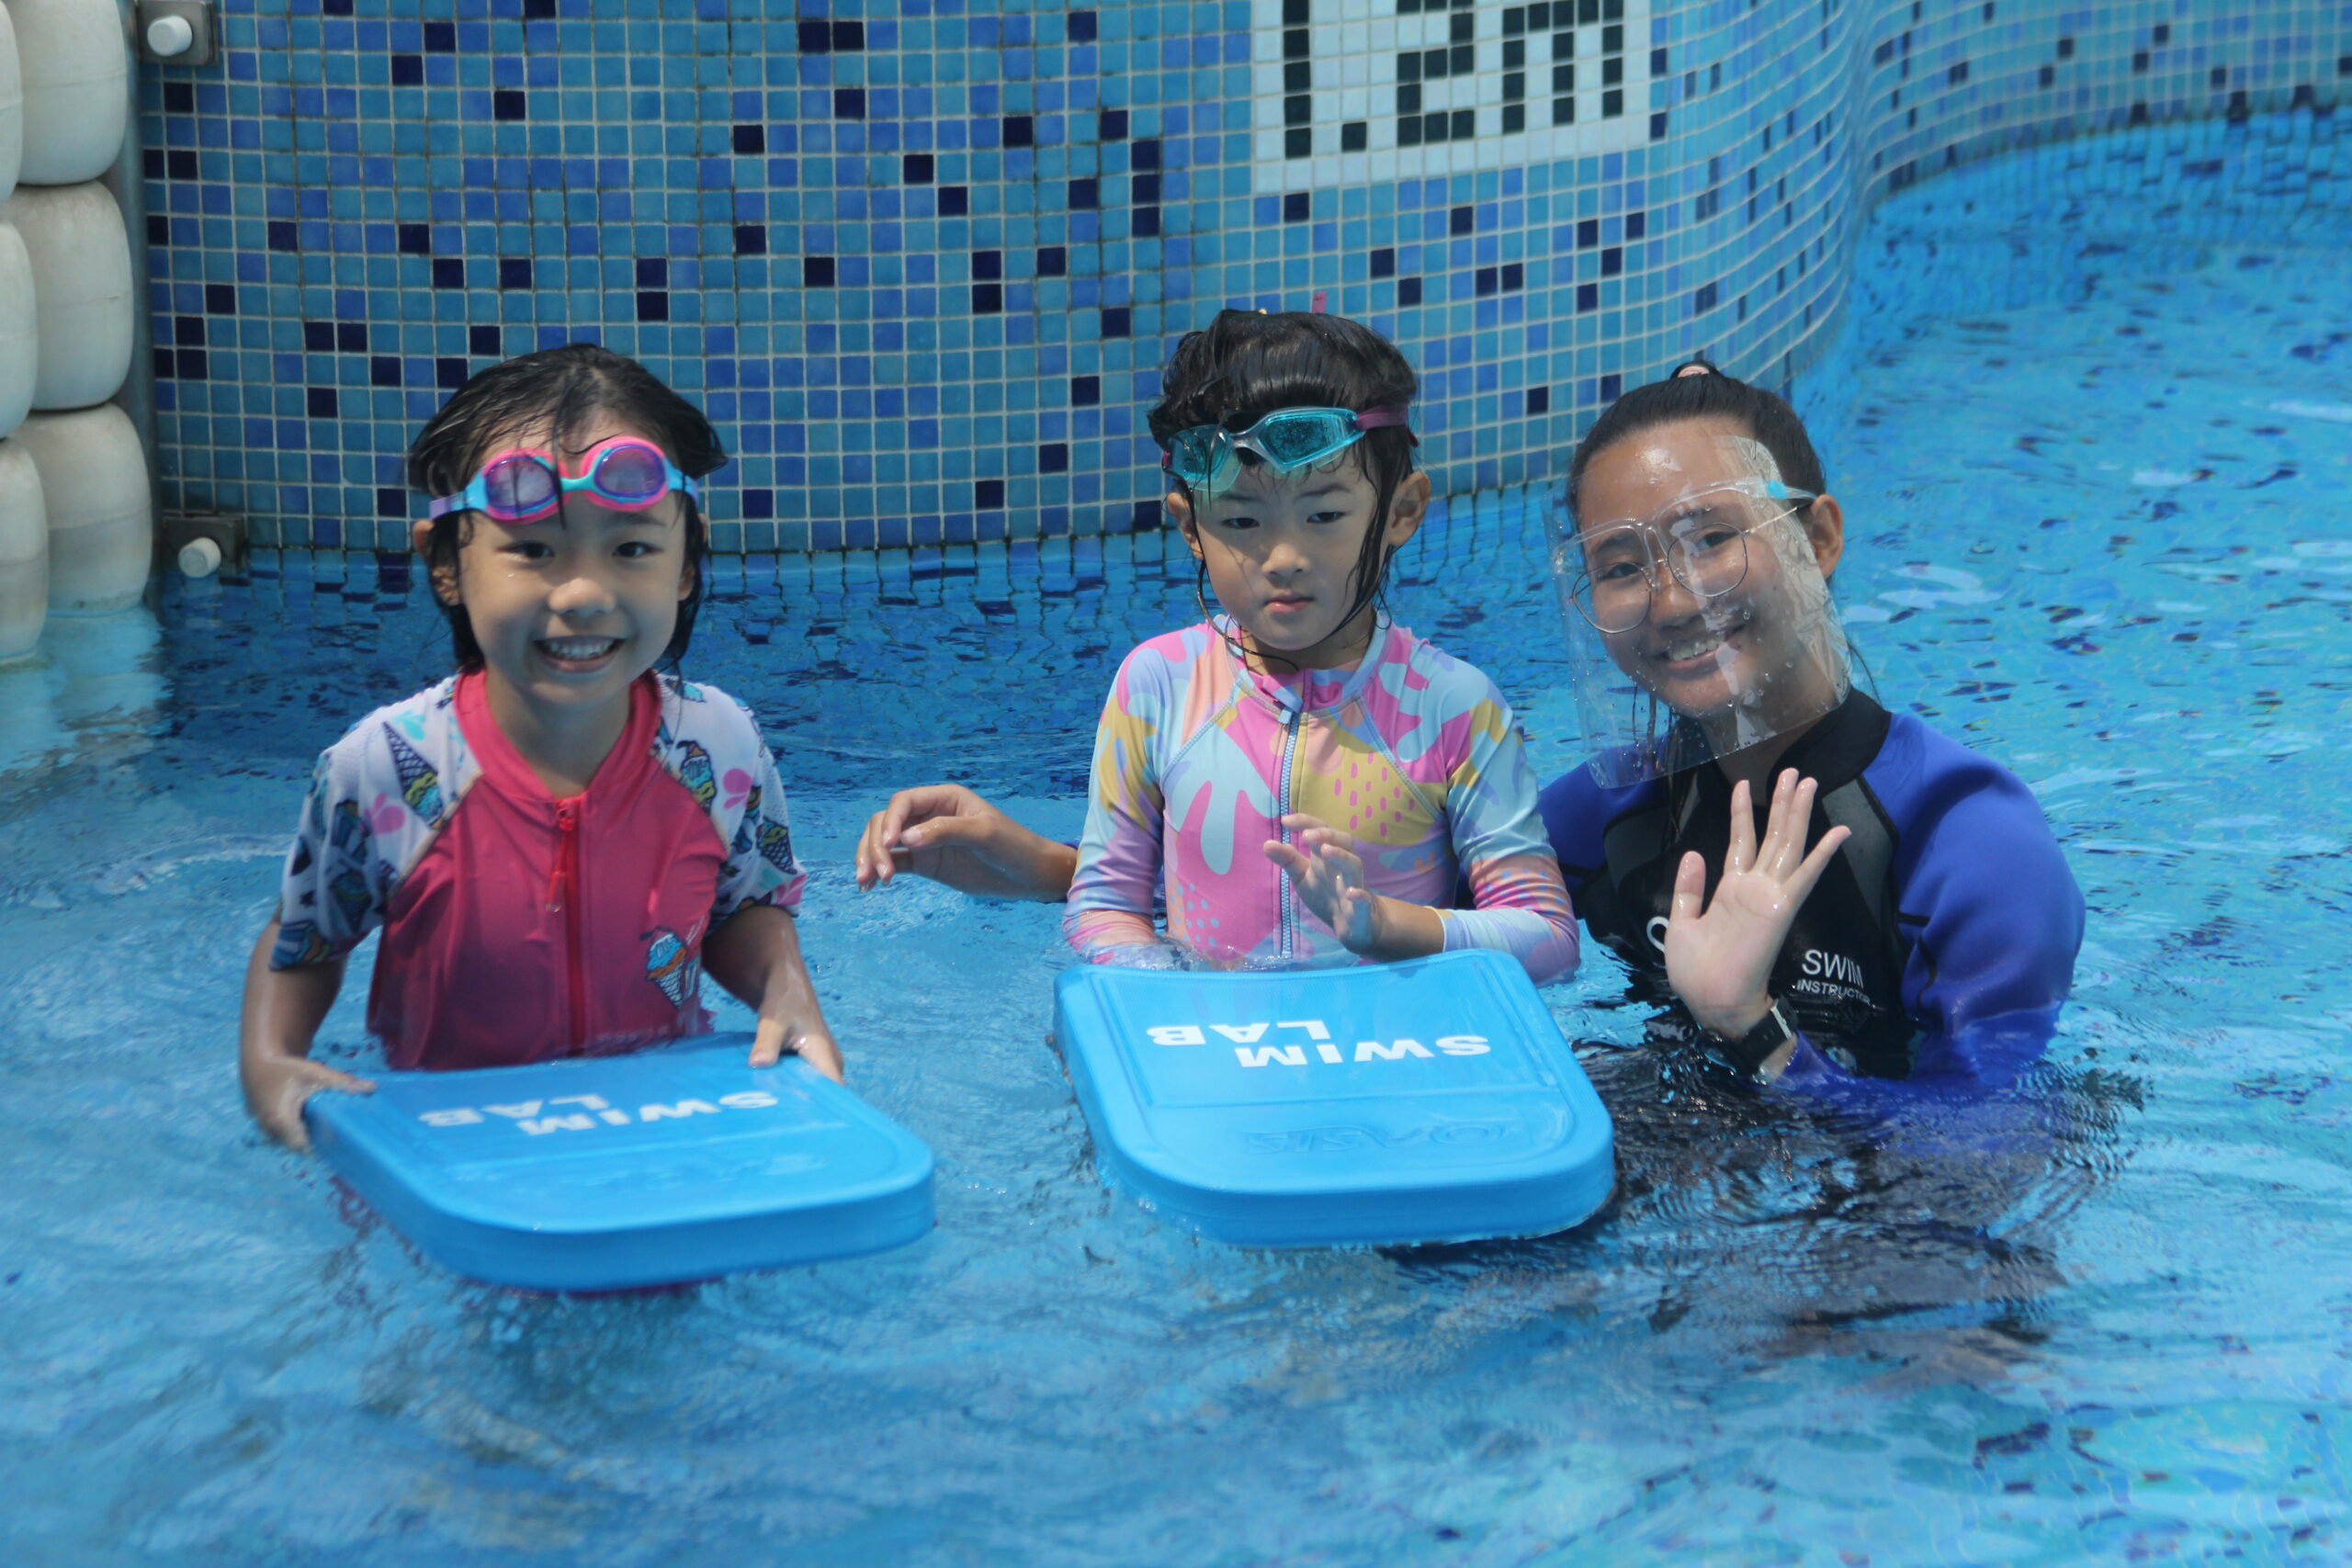 Two children holding kickboards and a swim instructor offering guidance in a pool, capturing an engaging moment of a kids' swimming lesson.